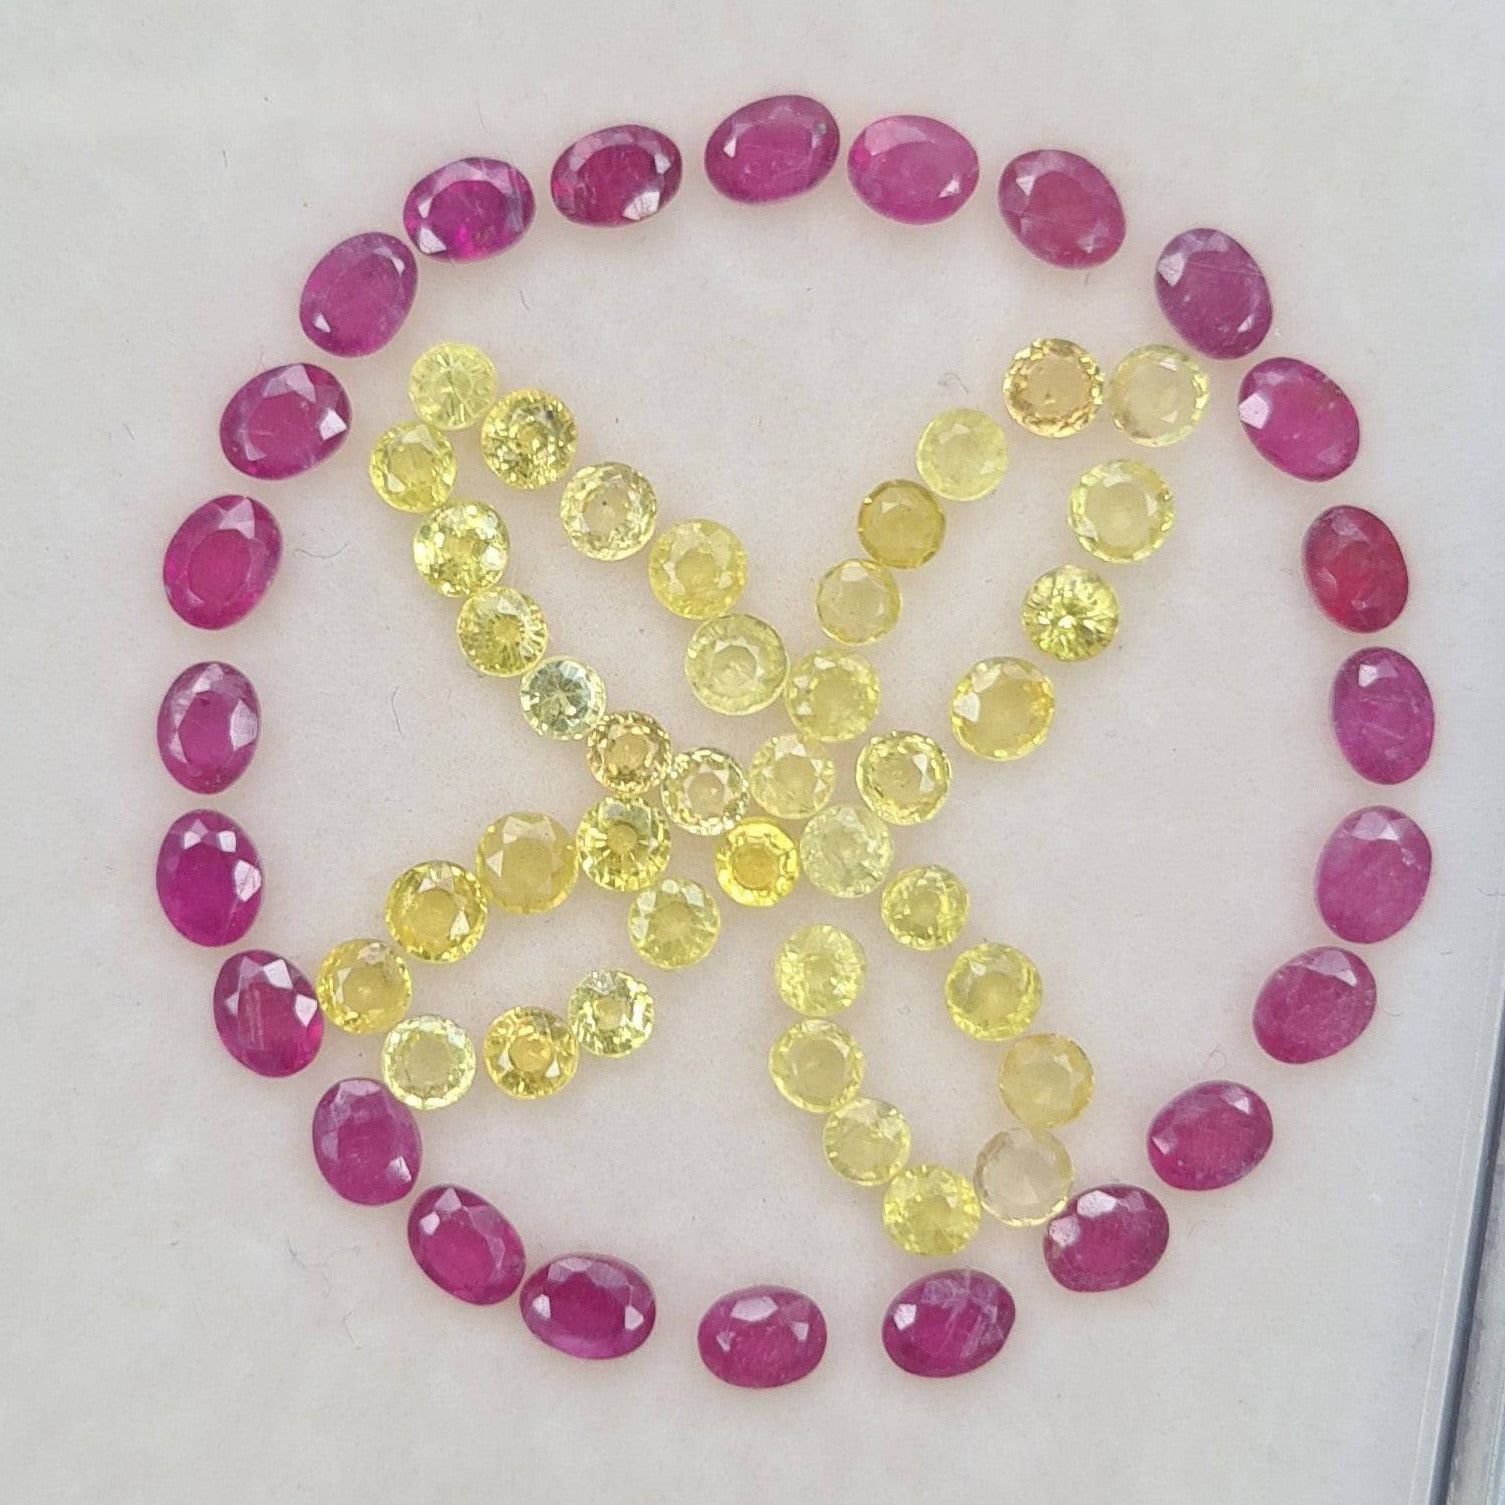 Natural Ruby and Yellow Sapphire, Size: 2-4mm Gems Lot -Loose Gemstones - The LabradoriteKing